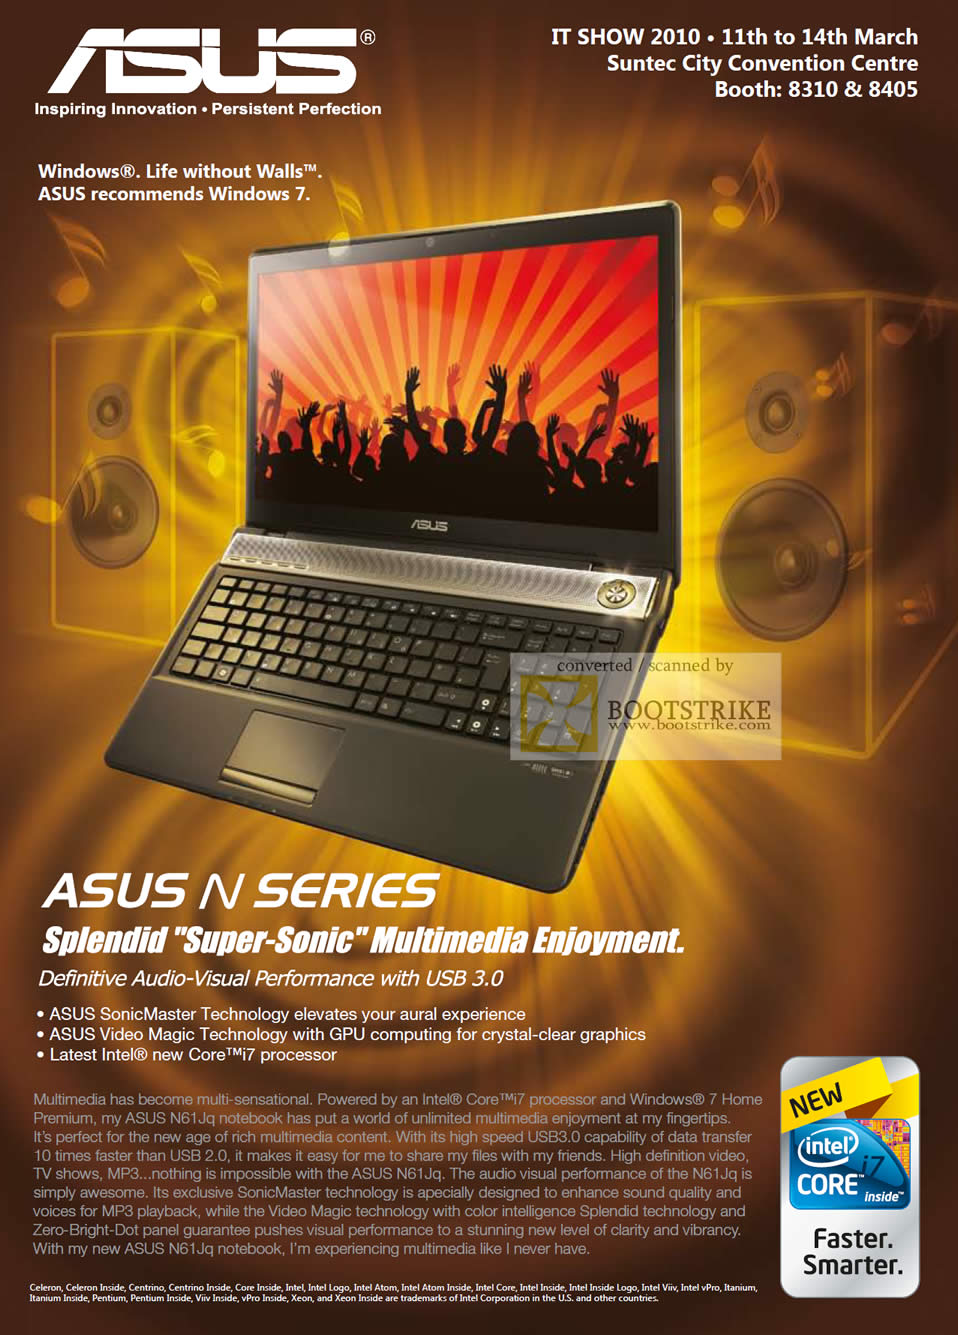 IT Show 2010 price list image brochure of ASUS Notebook N Series SonicMaster Video Magic